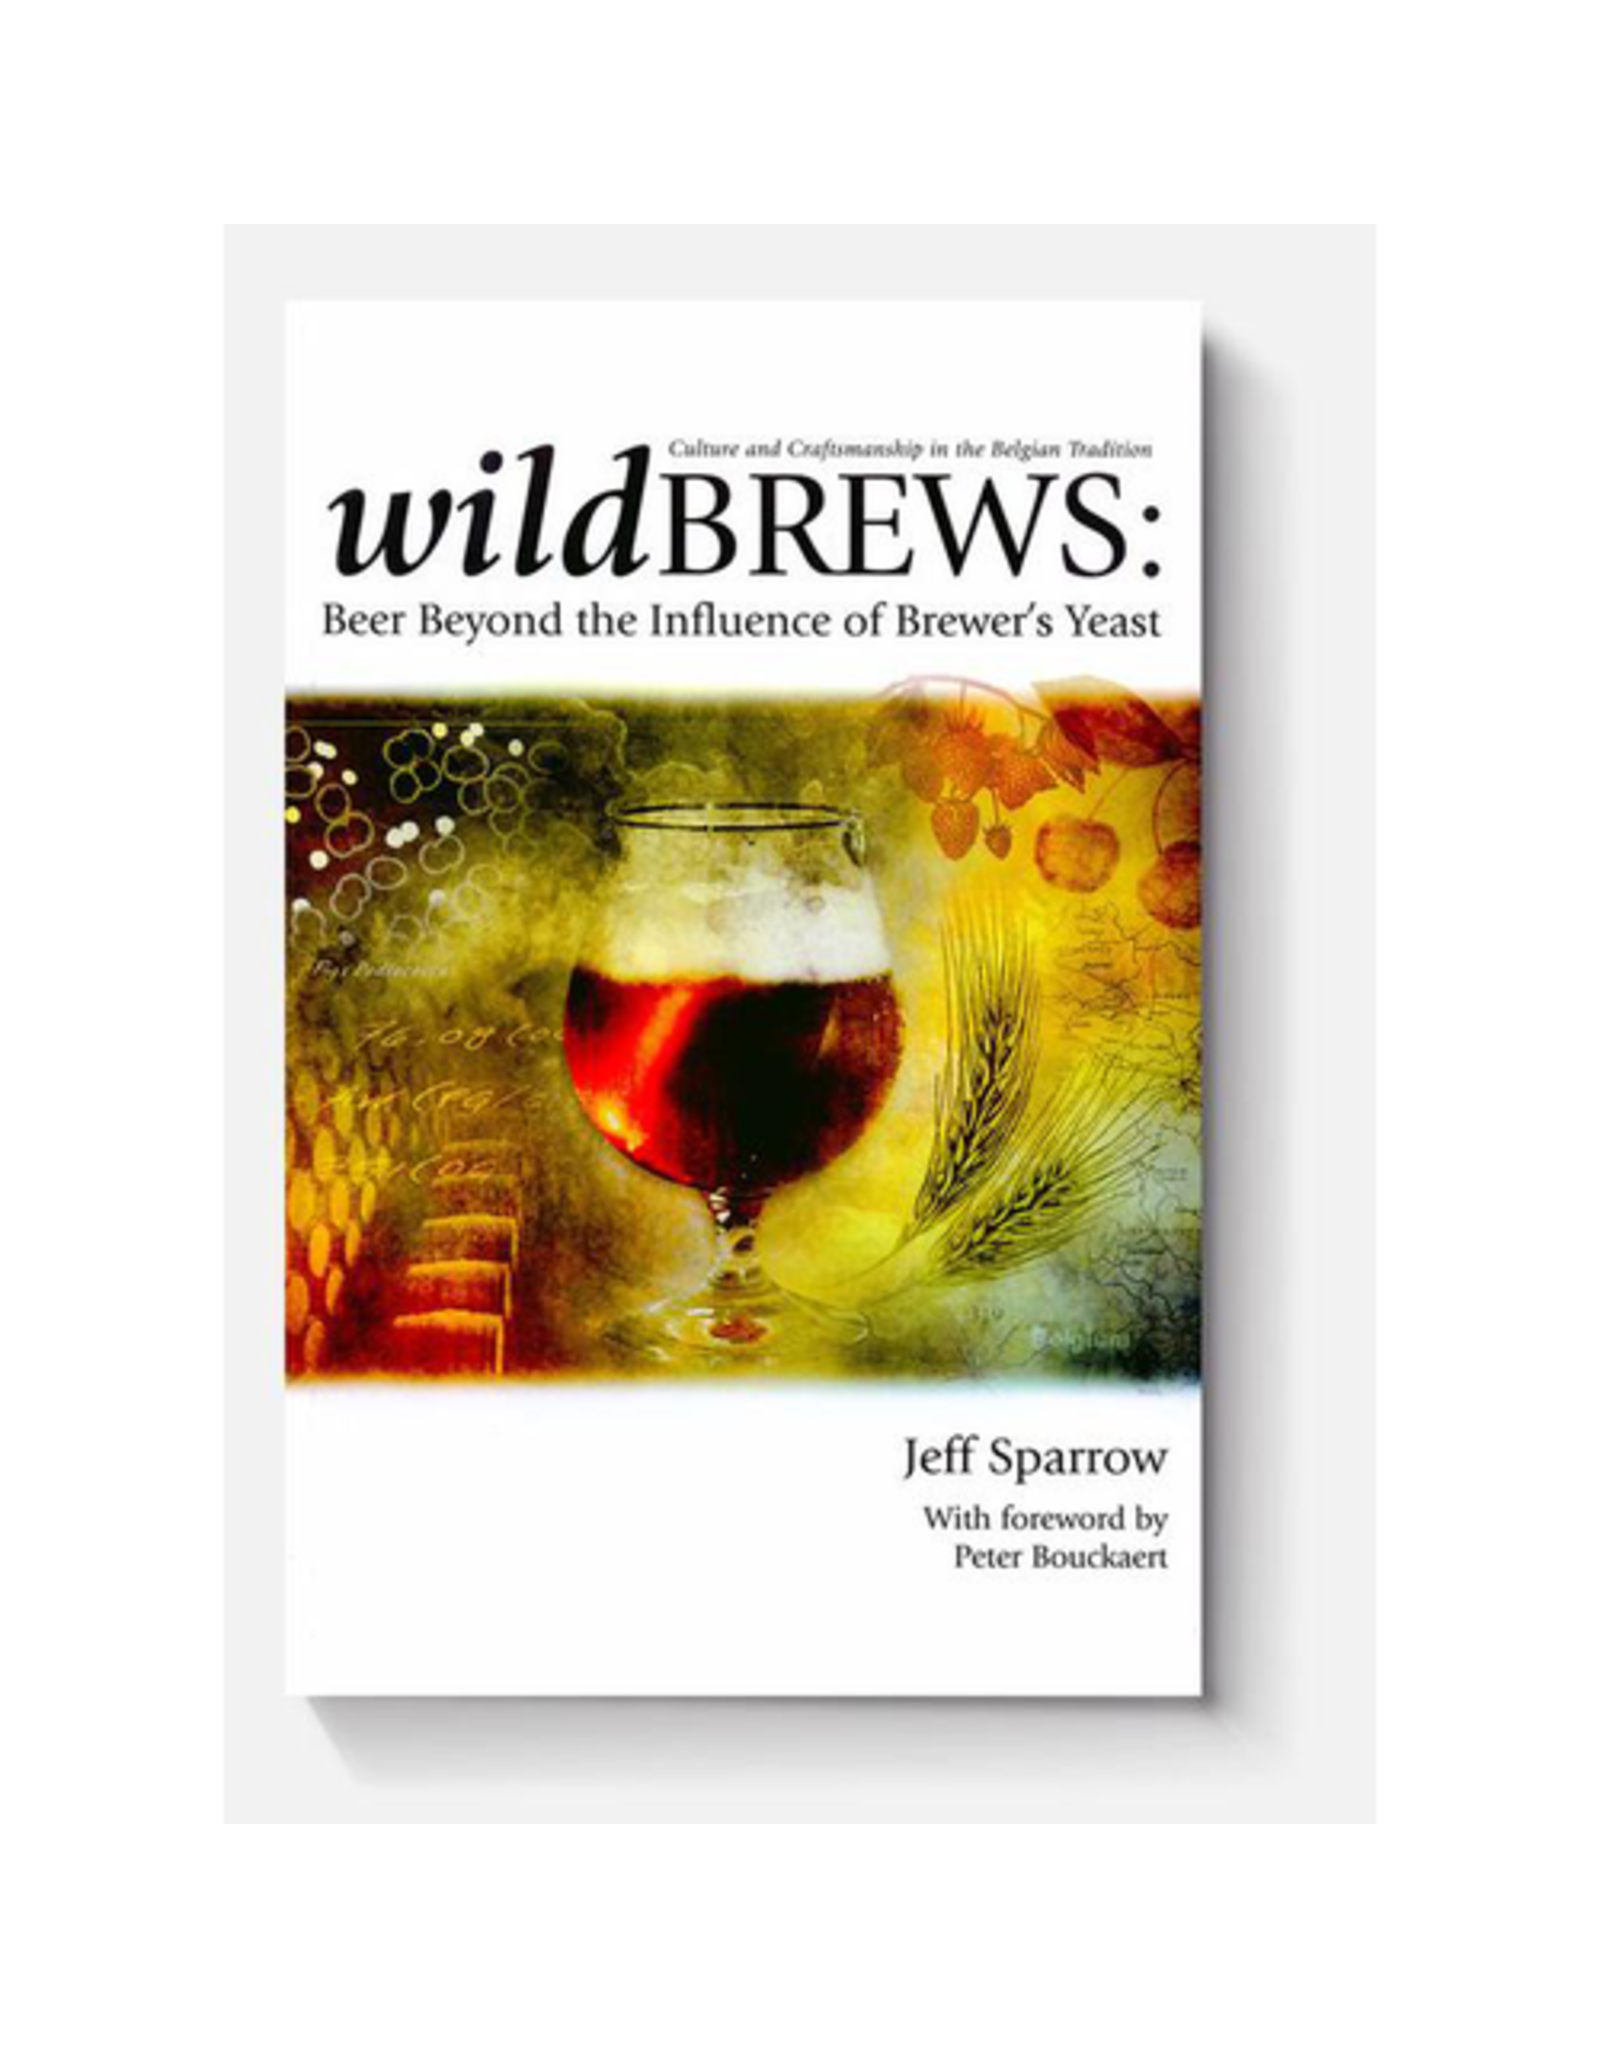 Wild Brews: Beer Beyond the Influence of Brewer’s Yeast  (book)